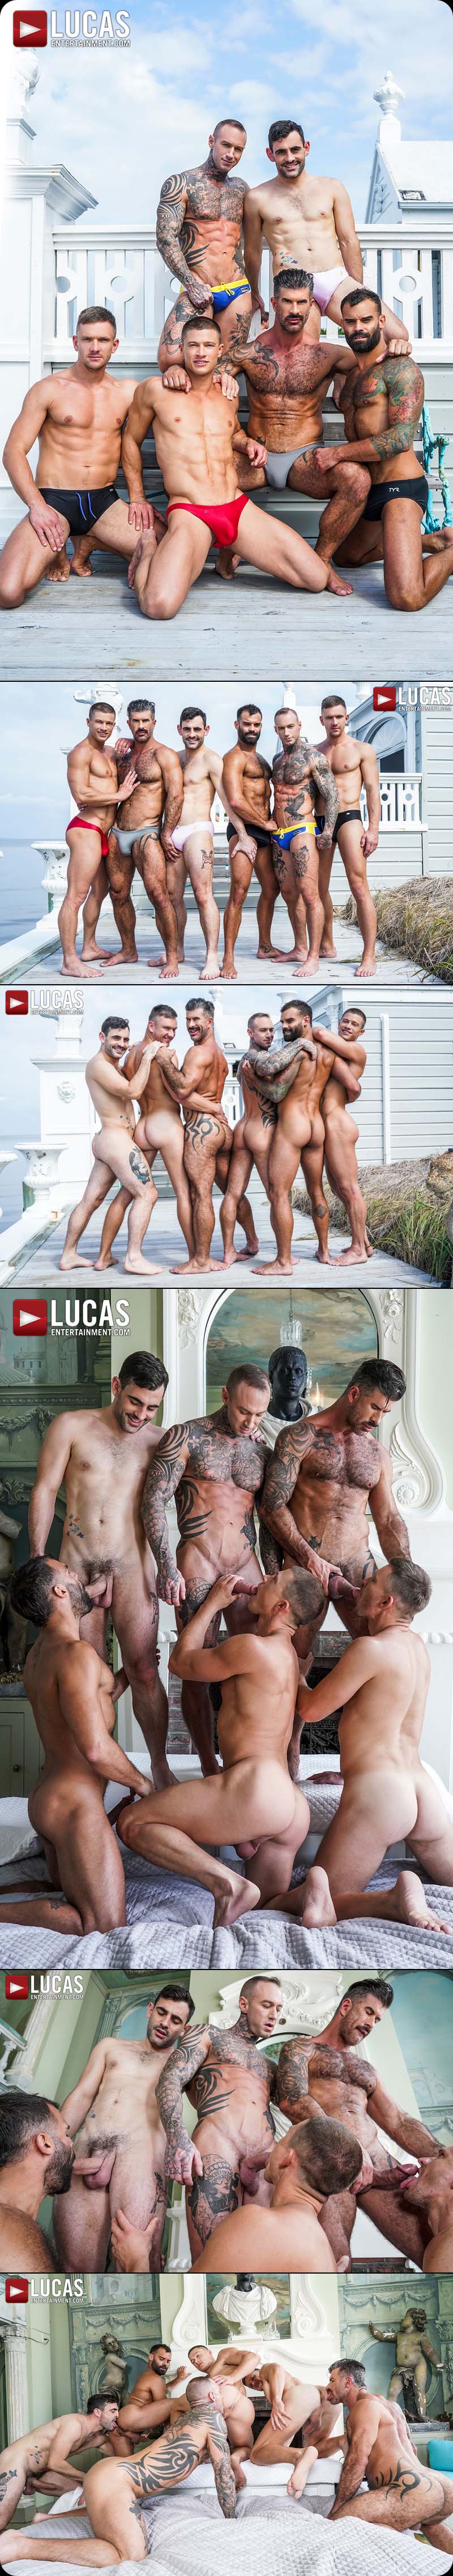 Ass-Hammering Hardware: Fire Island Orgy, Scene One (Adam Killian, Andrey Vic, Drake Masters, Dylan James, Max Arion and Ruslan Angelo) at LucasEntertainment